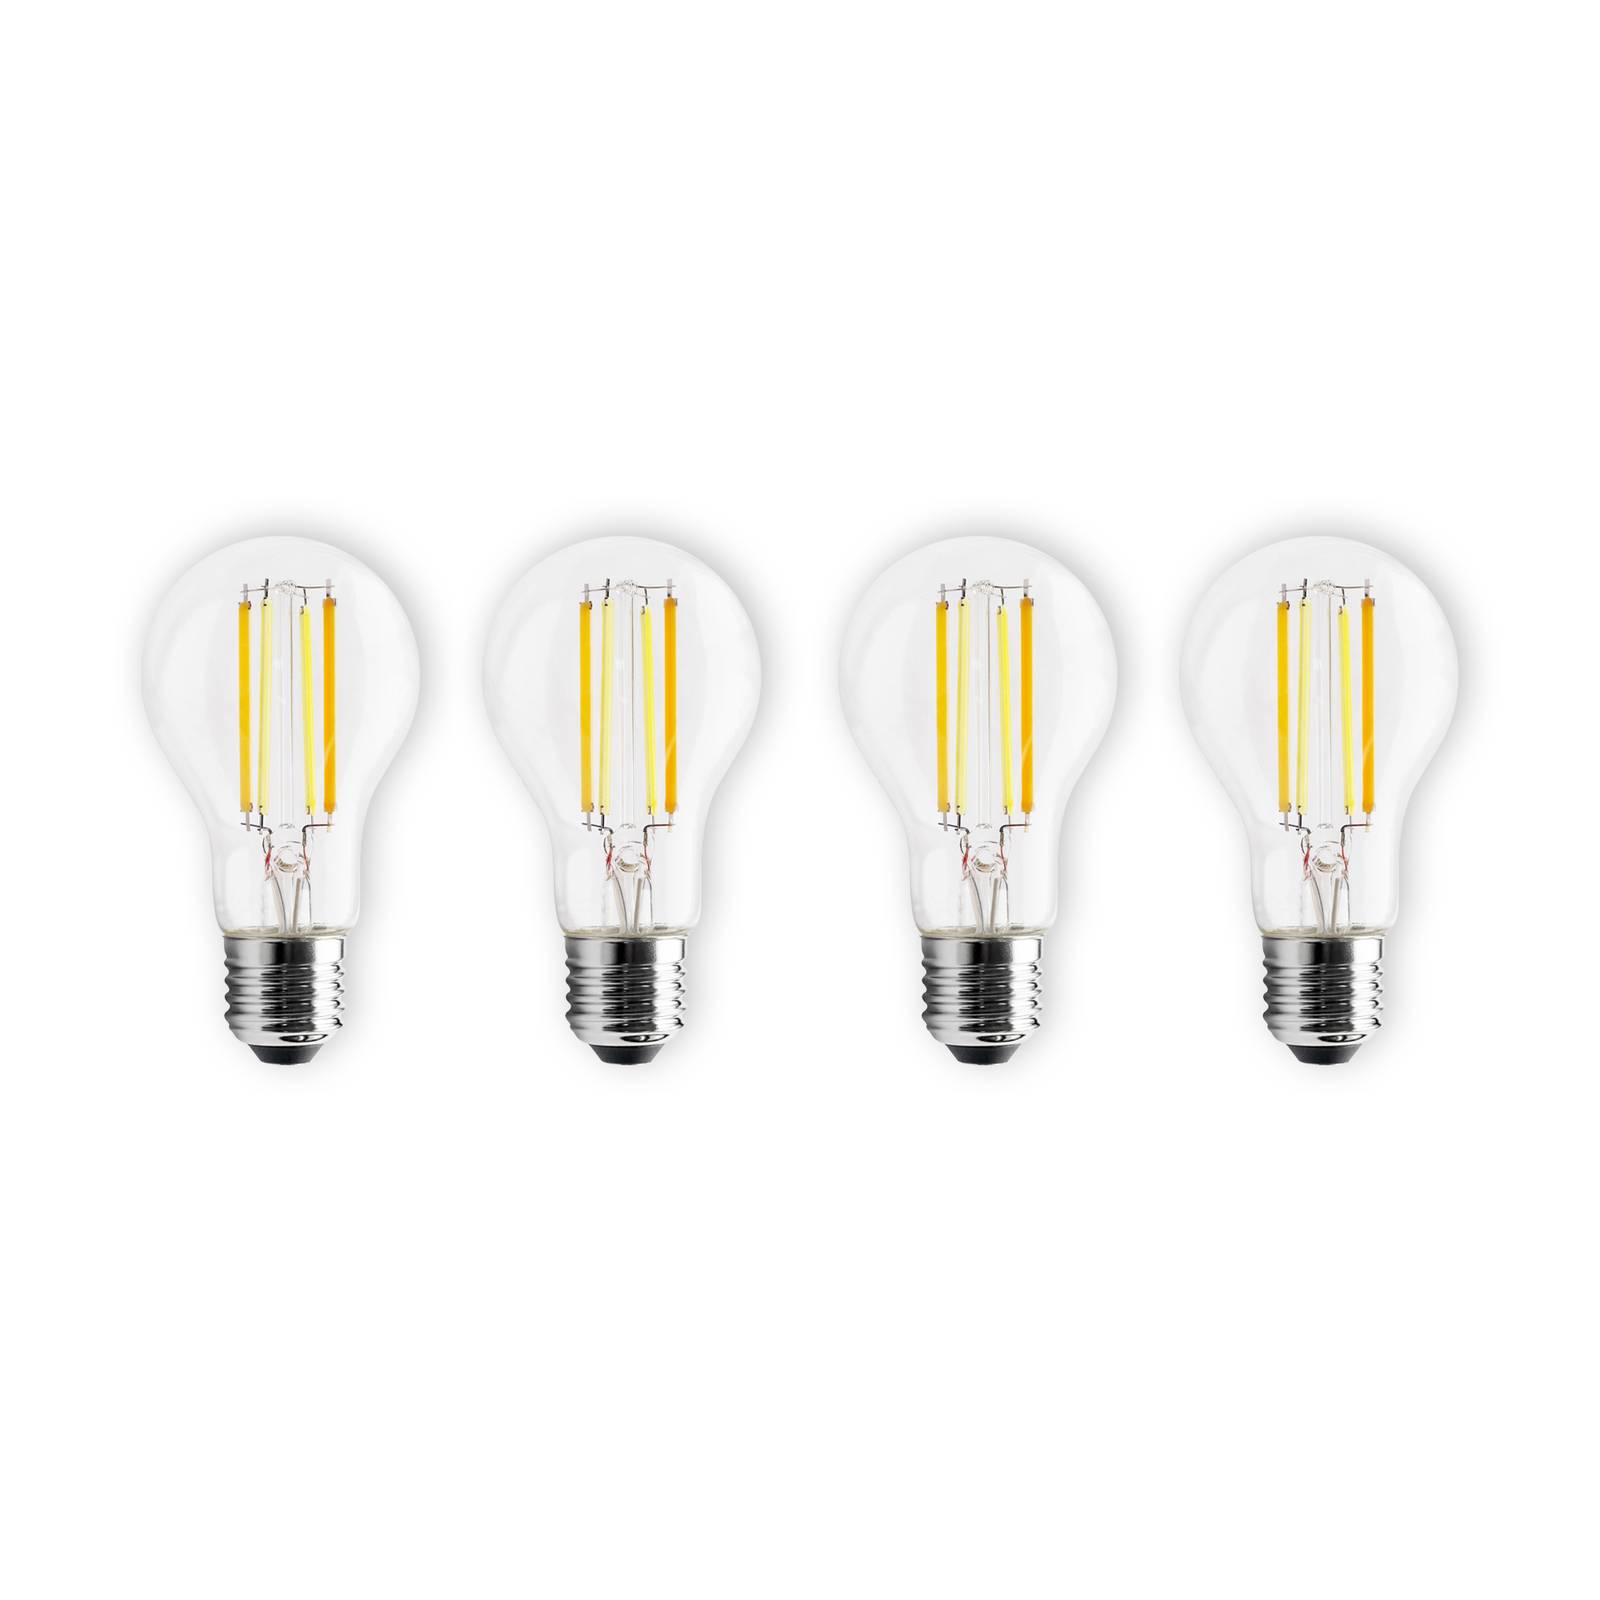 Image of Ampoule LED E27 7 W filament dimmable CCT Tuya x4 